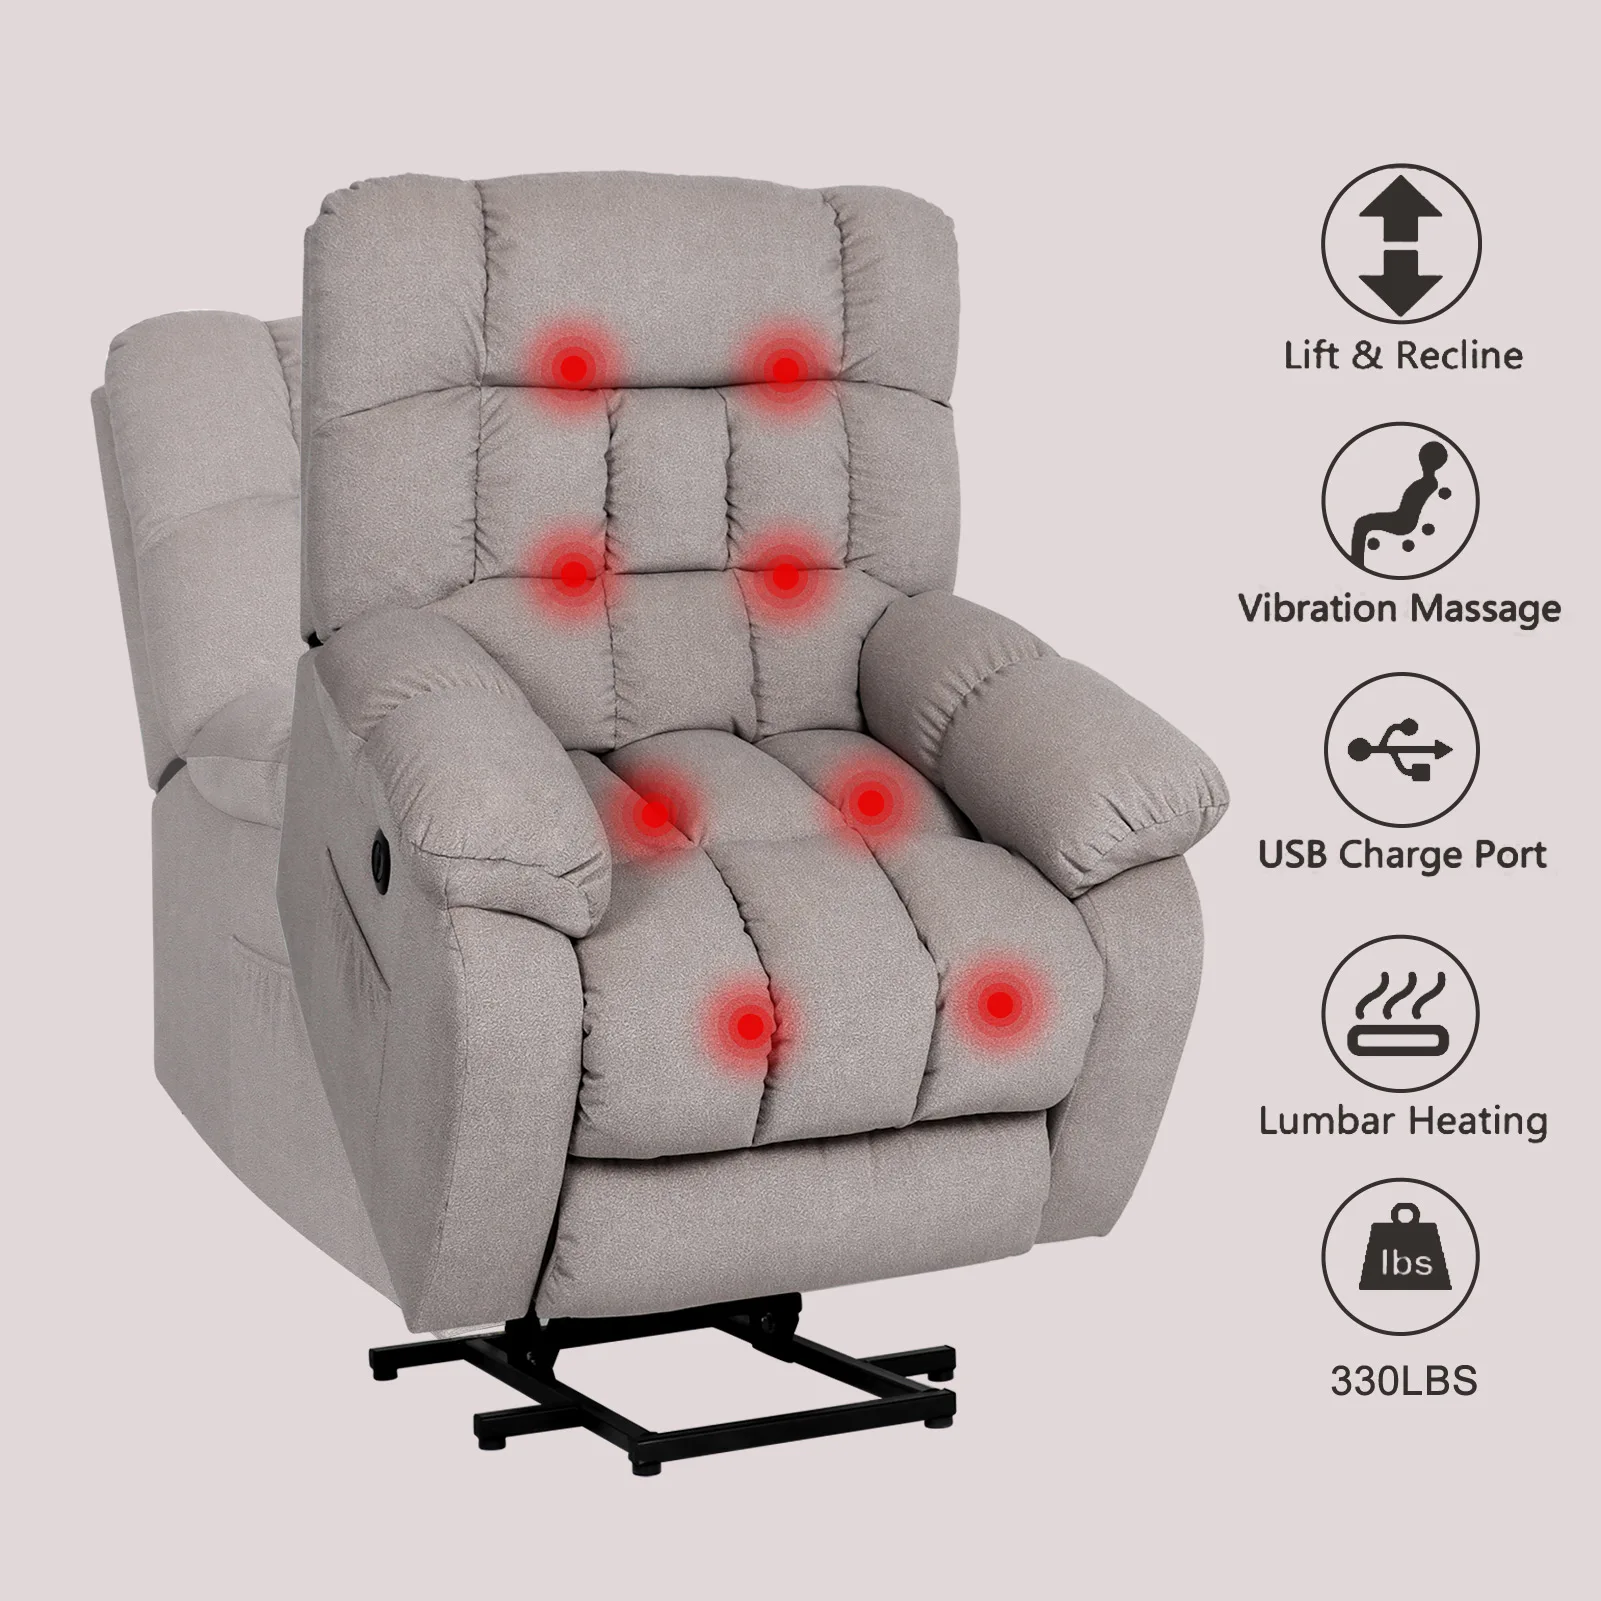 

Living Room Electric Power Lift Recliner Chairs for Elderly Plush Lift Chair with Remote Control Heat & Vibration Massage